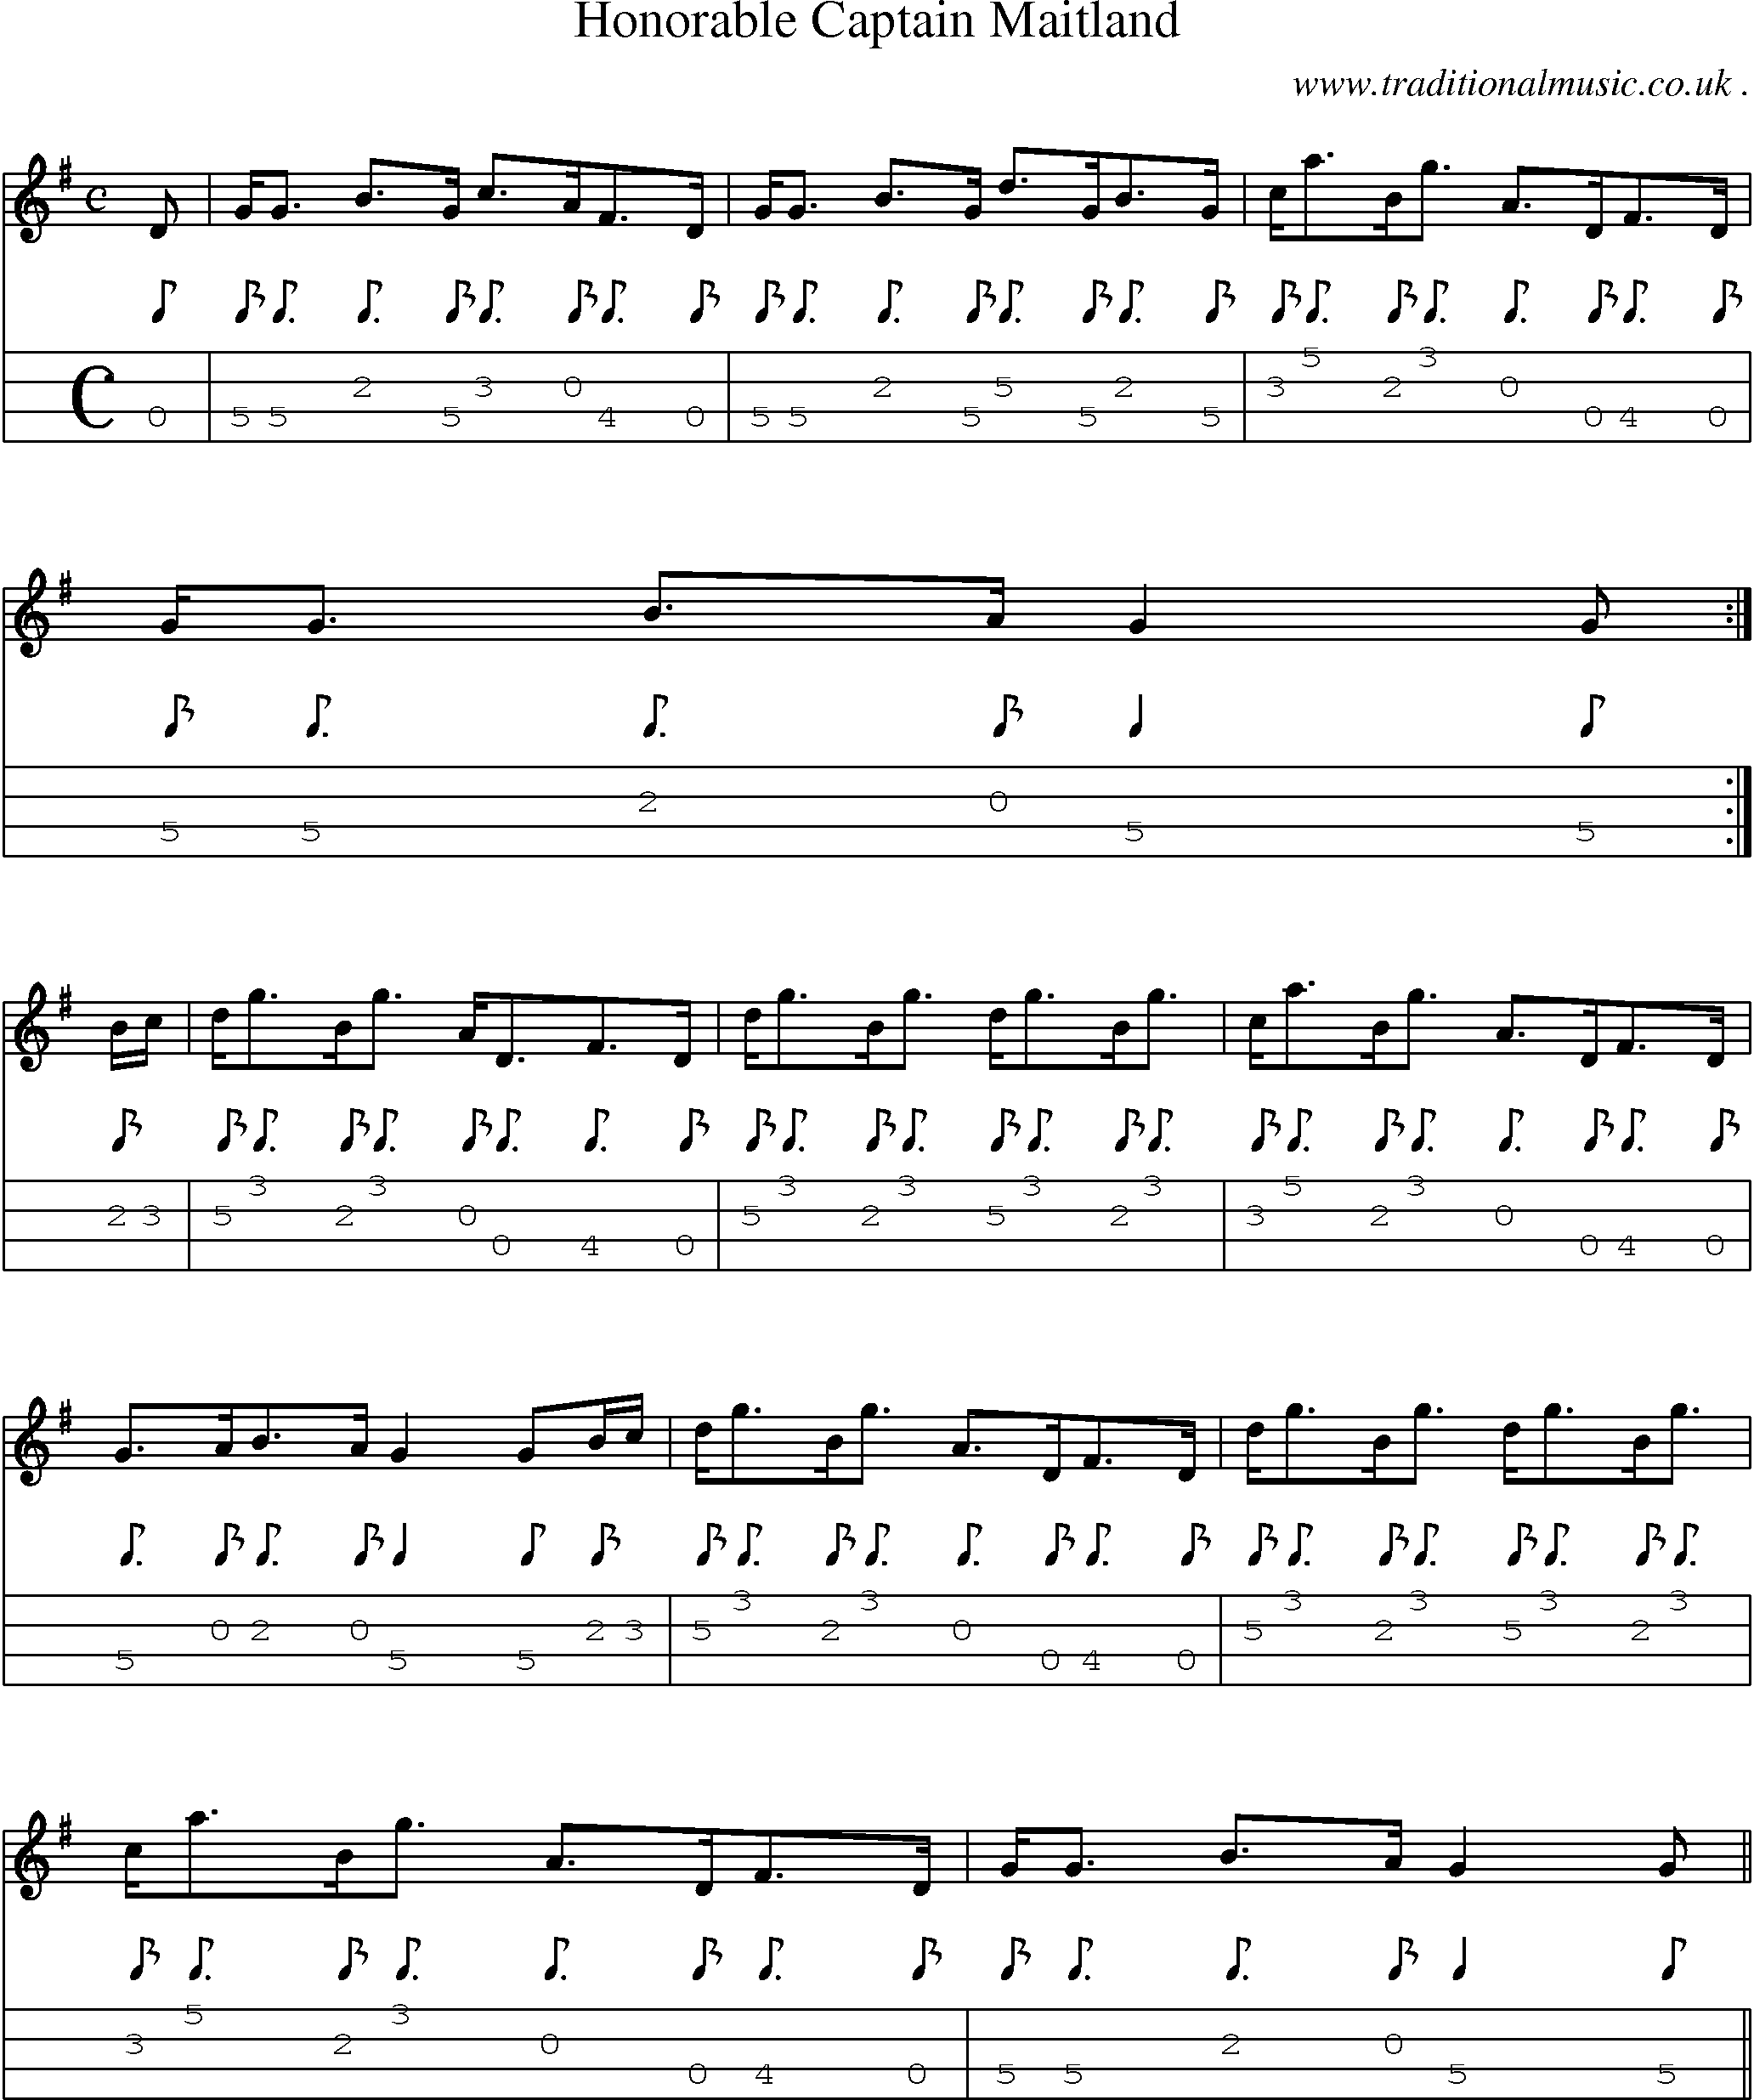 Sheet-music  score, Chords and Mandolin Tabs for Honorable Captain Maitland